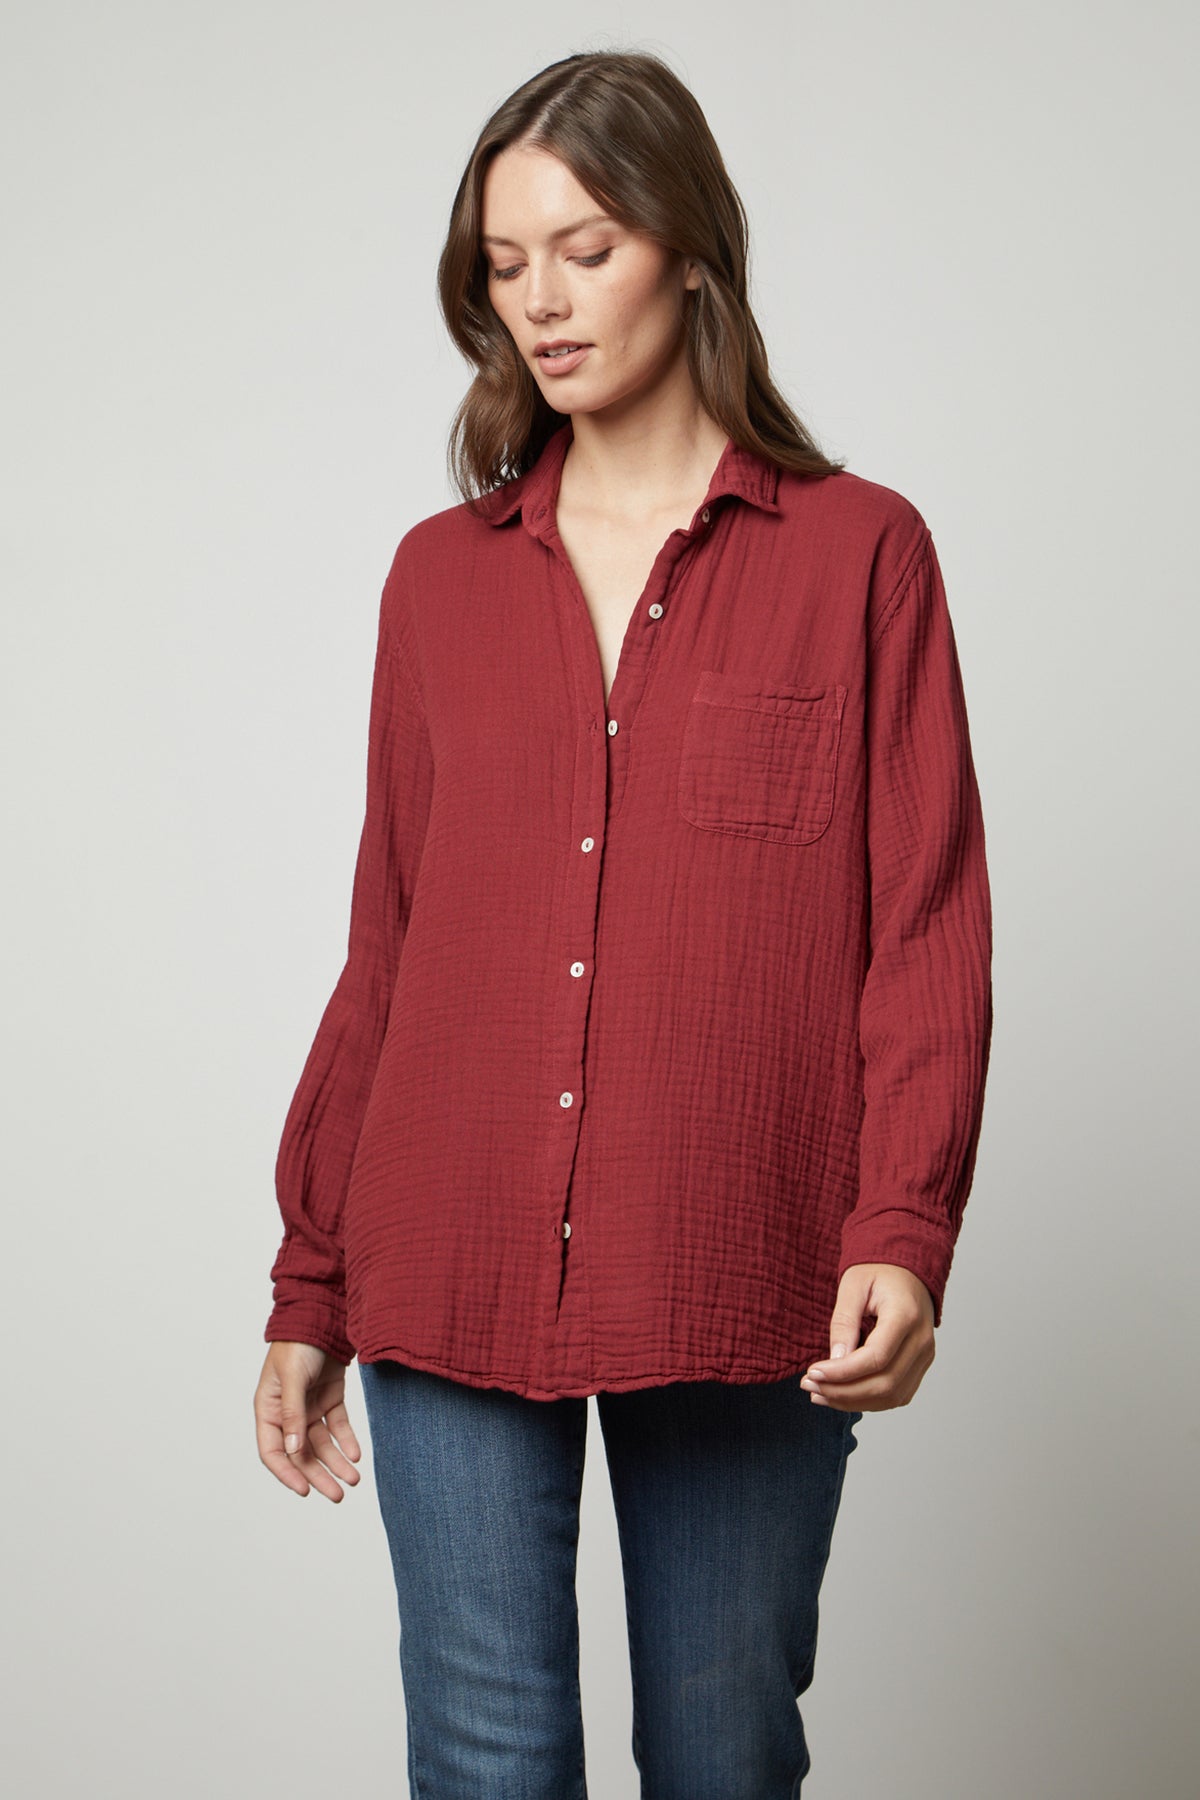 The model is wearing an oversized fit MARGO COTTON GAUZE BUTTON-UP SHIRT by Velvet by Graham & Spencer.-35655728332993